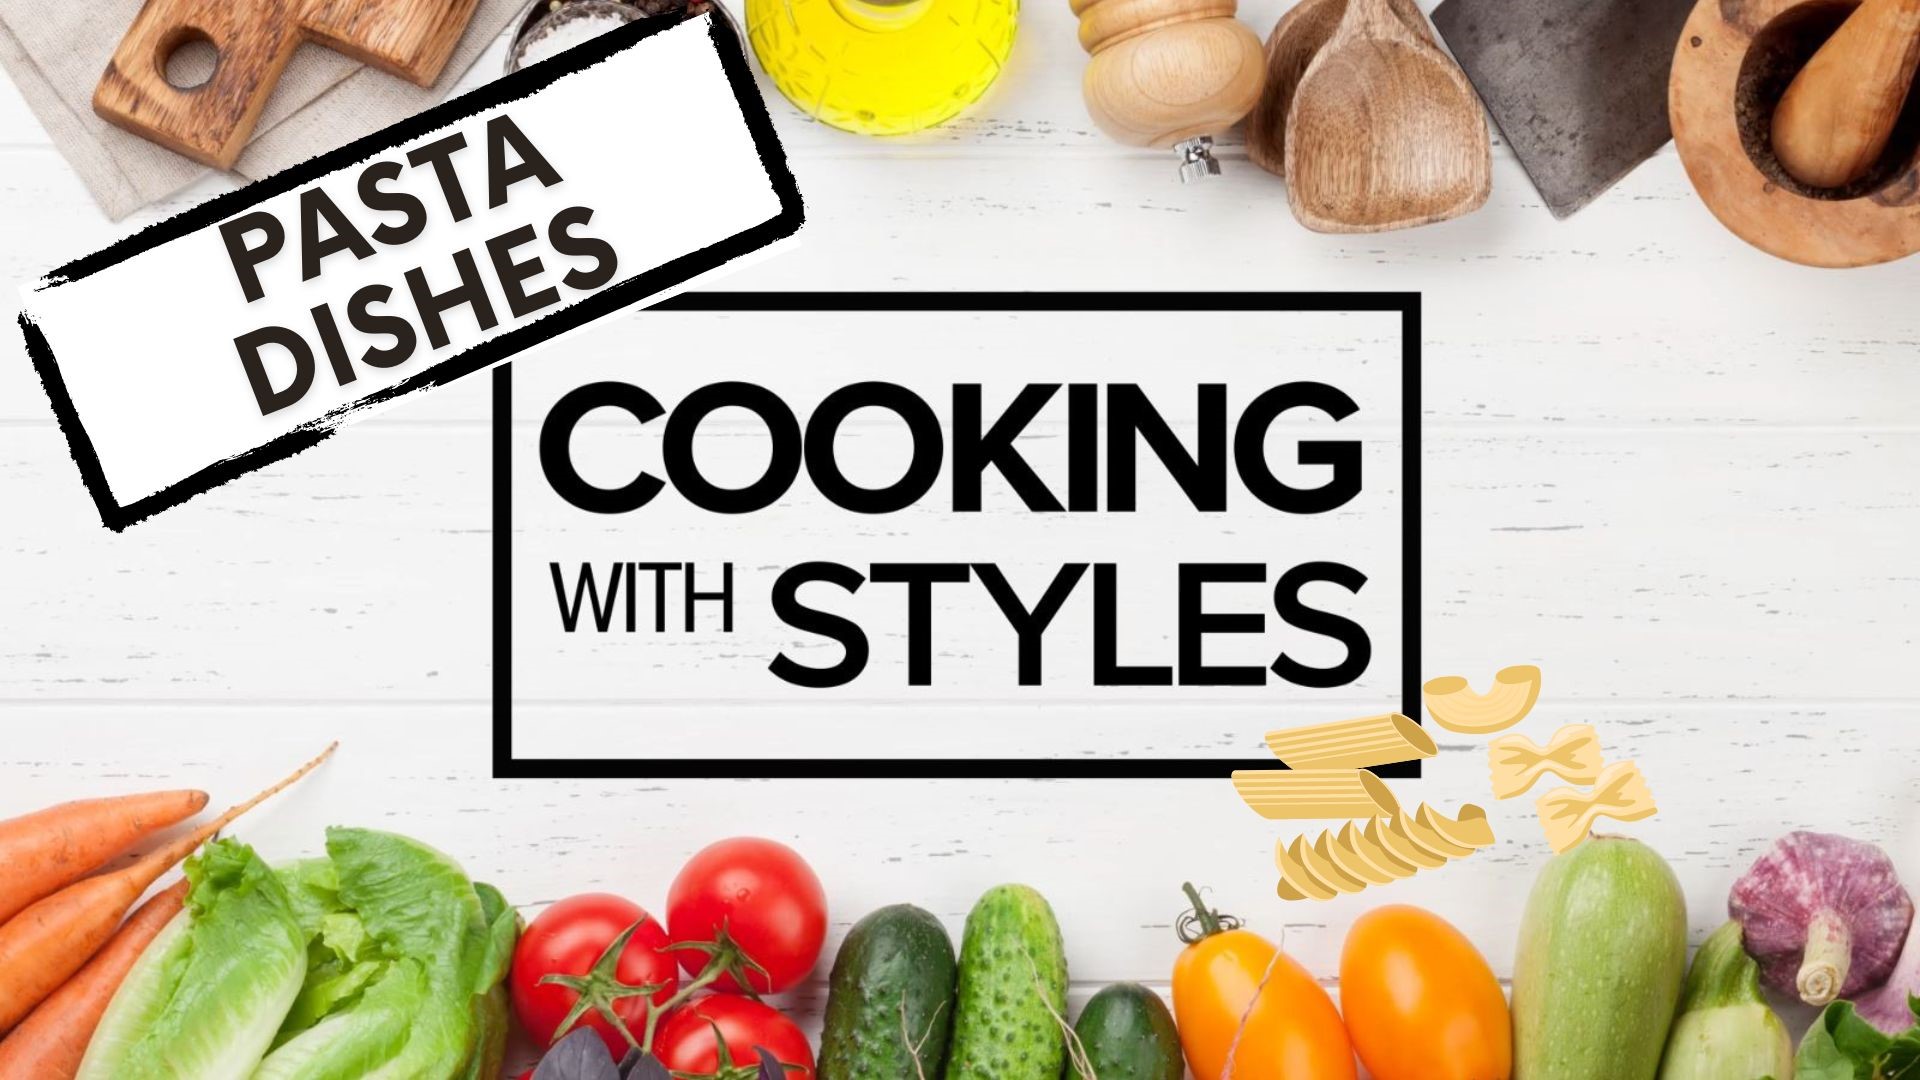 KFMB's Shawn Styles shares a collection of pasta recipes you and your family are sure to love. From homemade gnocchi to burrata ravioli, he shares dishes sure to wow